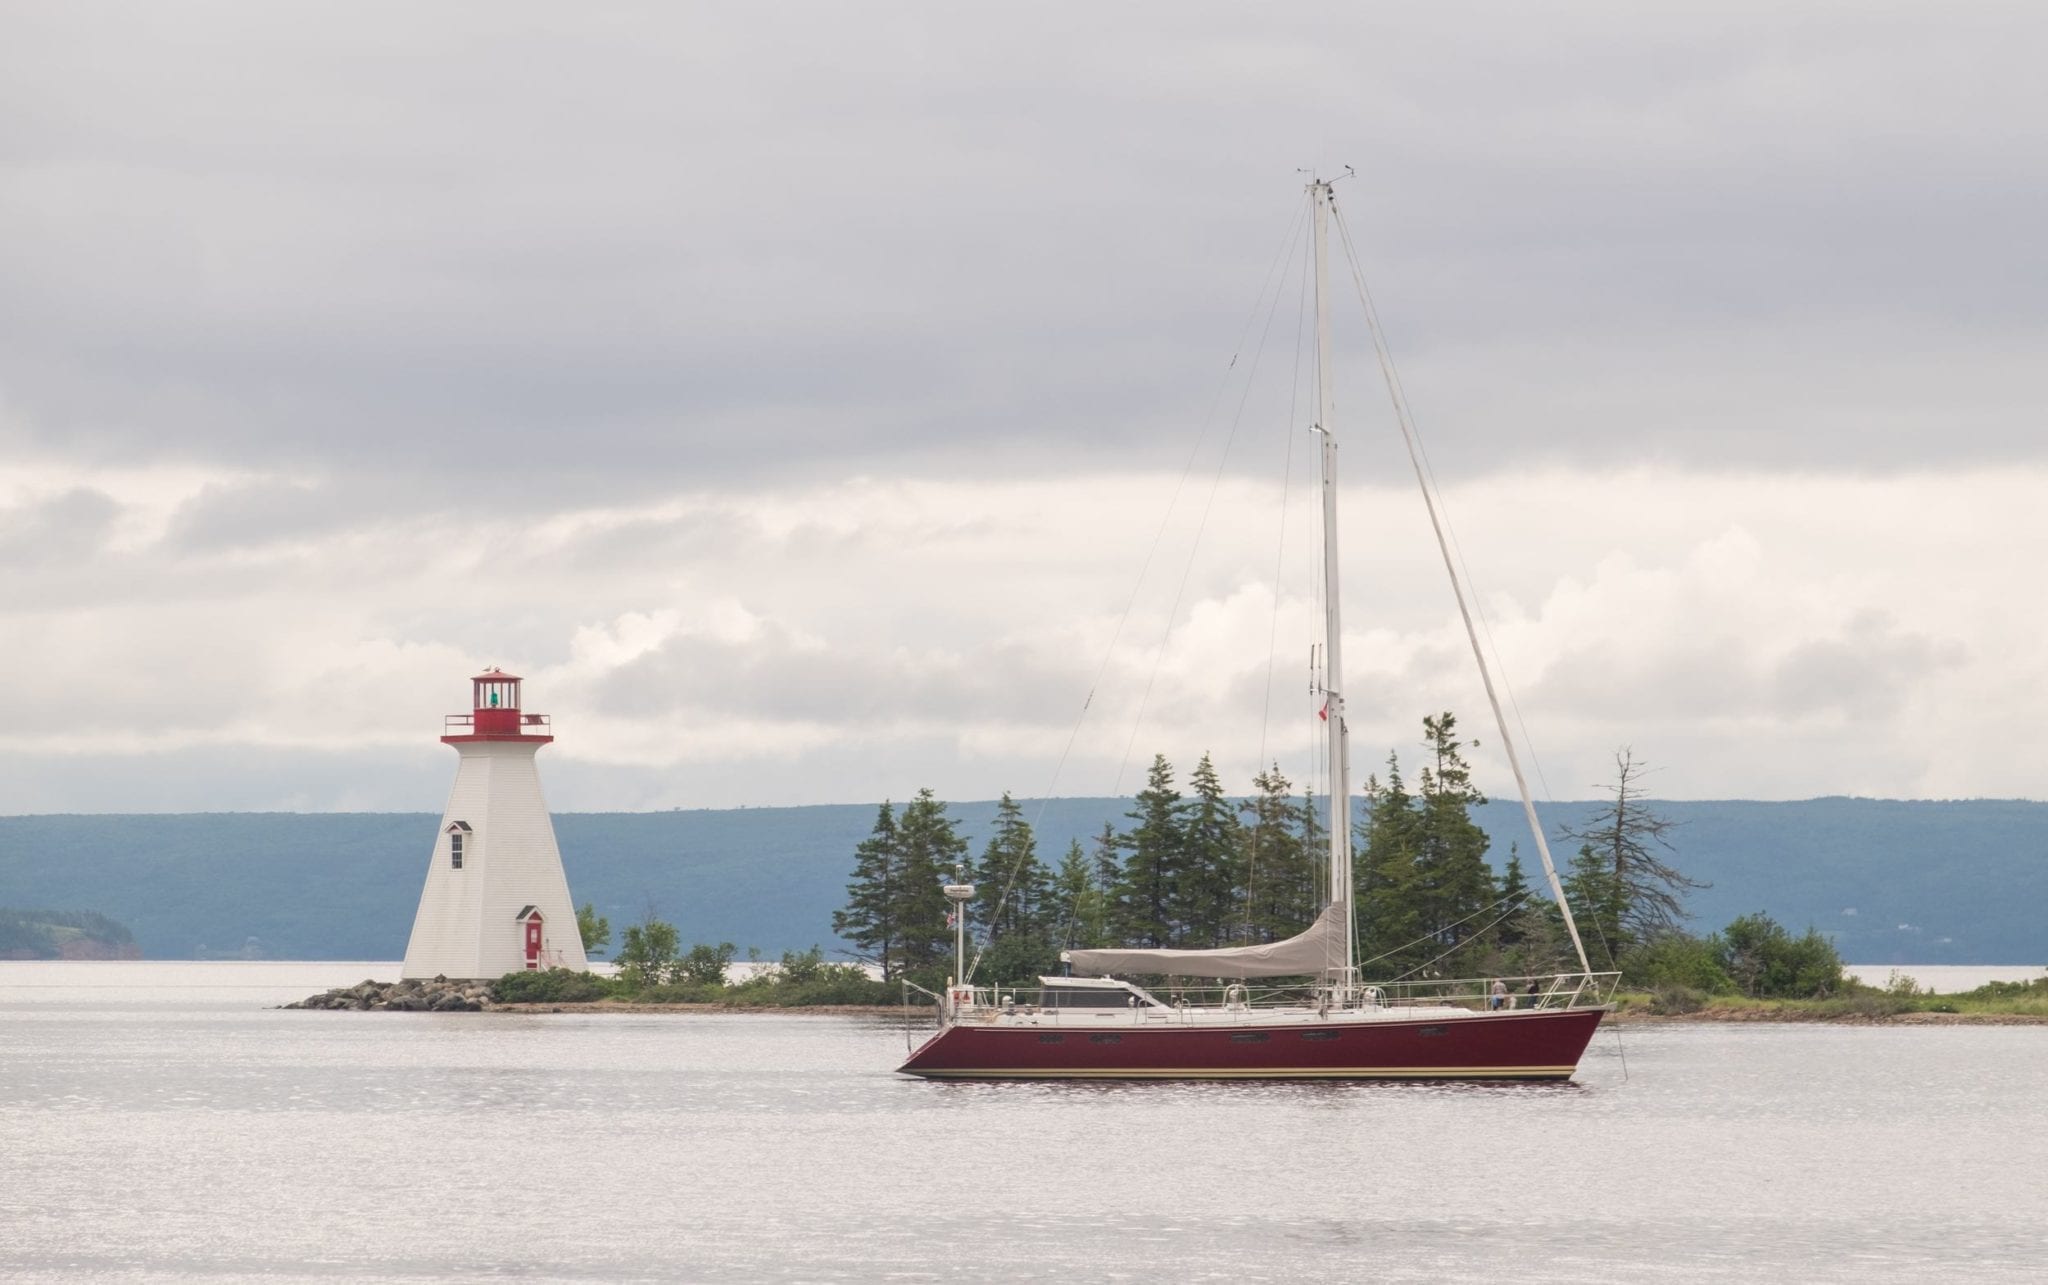 A white lighthouse with a red top on a tiny island filled with pine trees in a calm bay. In the foreground is a sailboat.